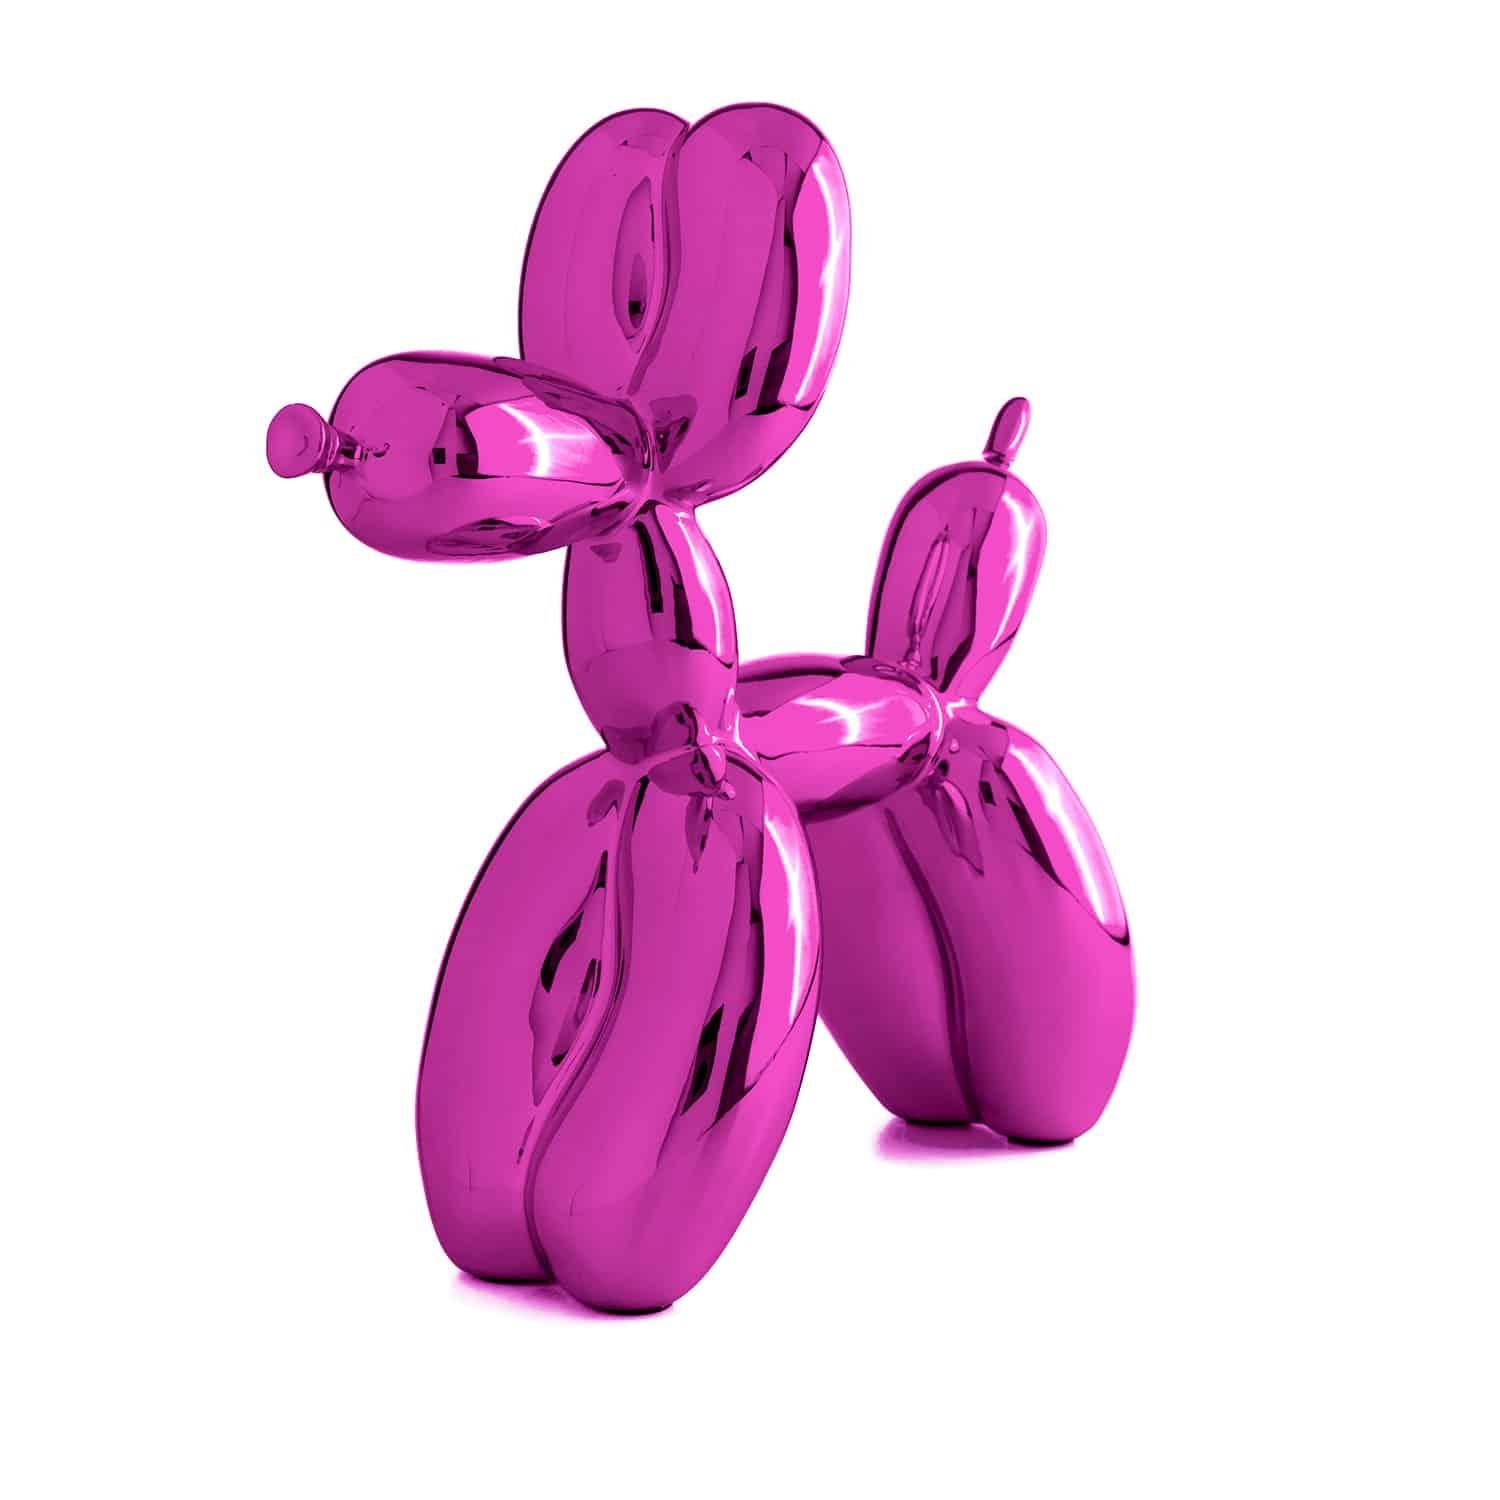 After Jeff Koons Figurative Sculpture - Balloon Dog (After) - Pink